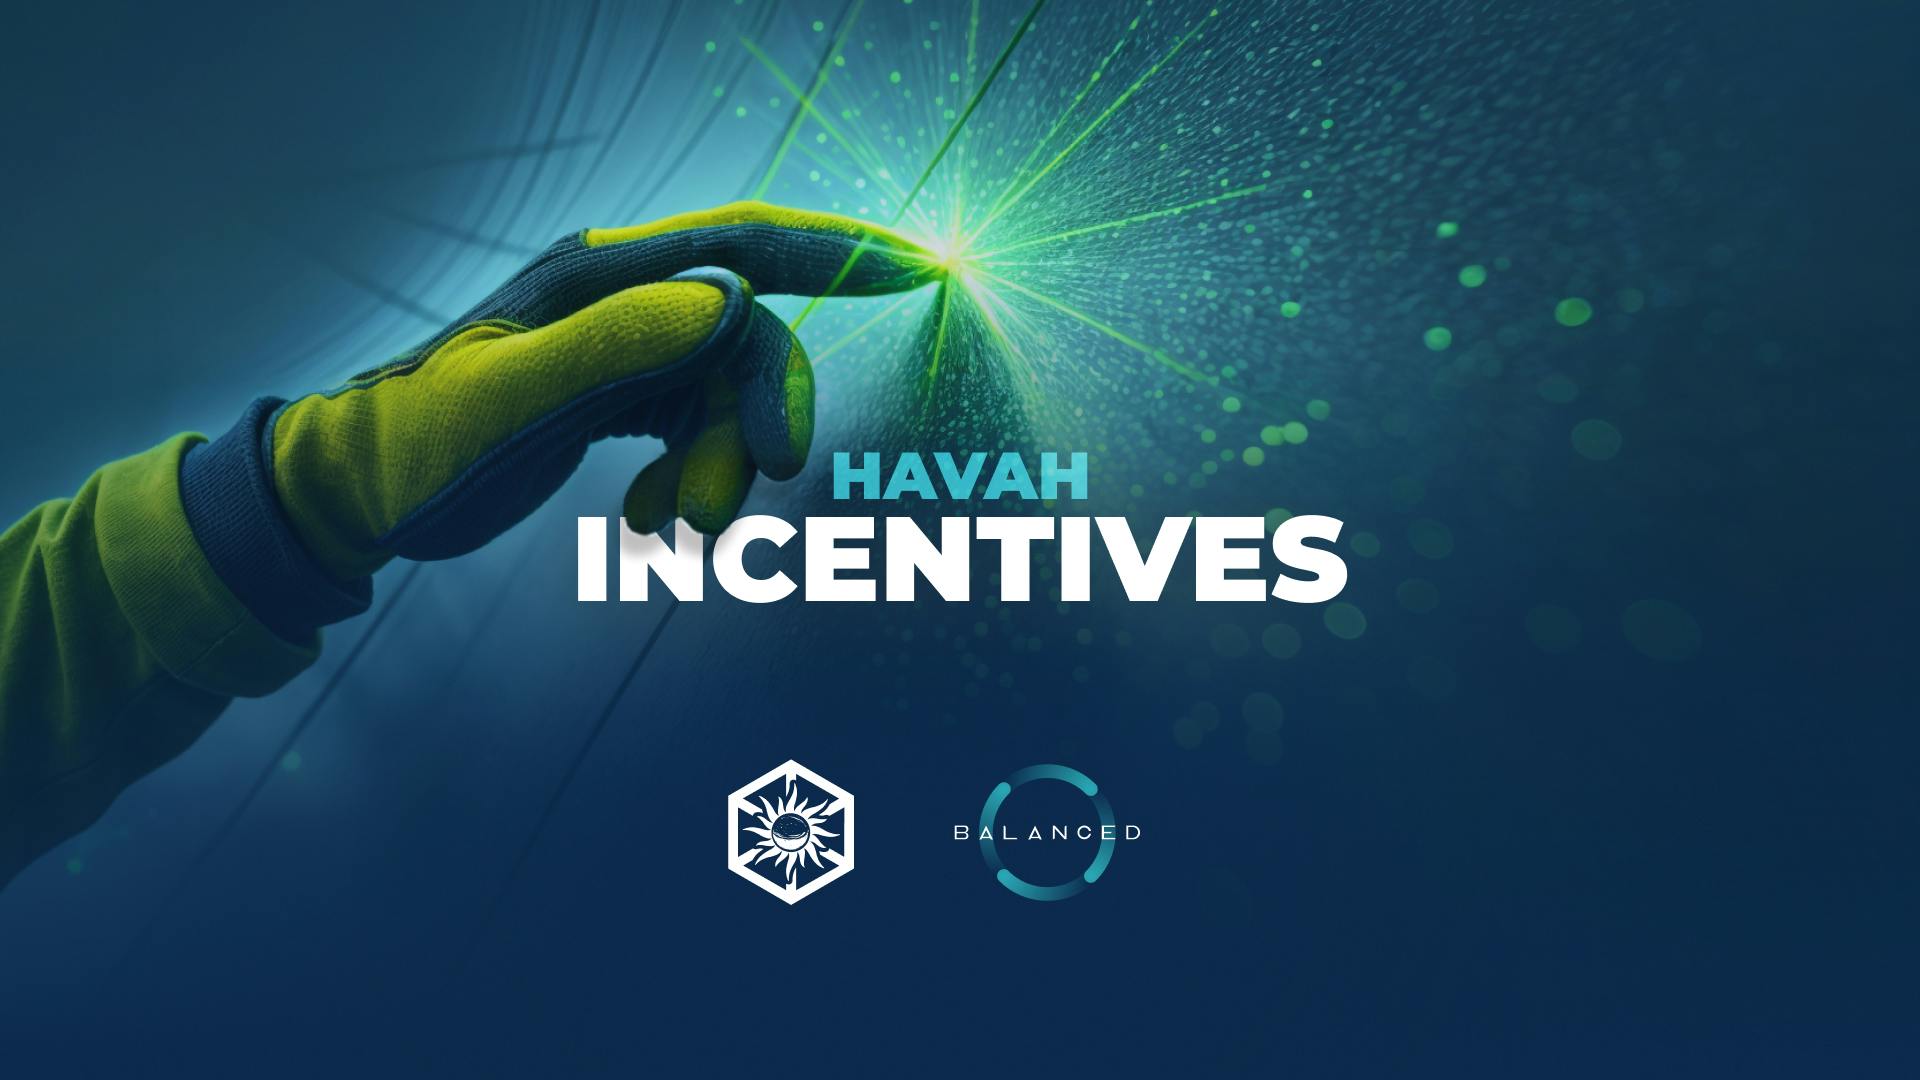 HAVAH incentivizes liquidity for the HVH/sICX pool on Balanced with weekly bribes of 300 USD of HVH token, available for 16 weeks. Liquidity providers earn BALN, which can be staked for bBALN to boost rewards and participate in governance.